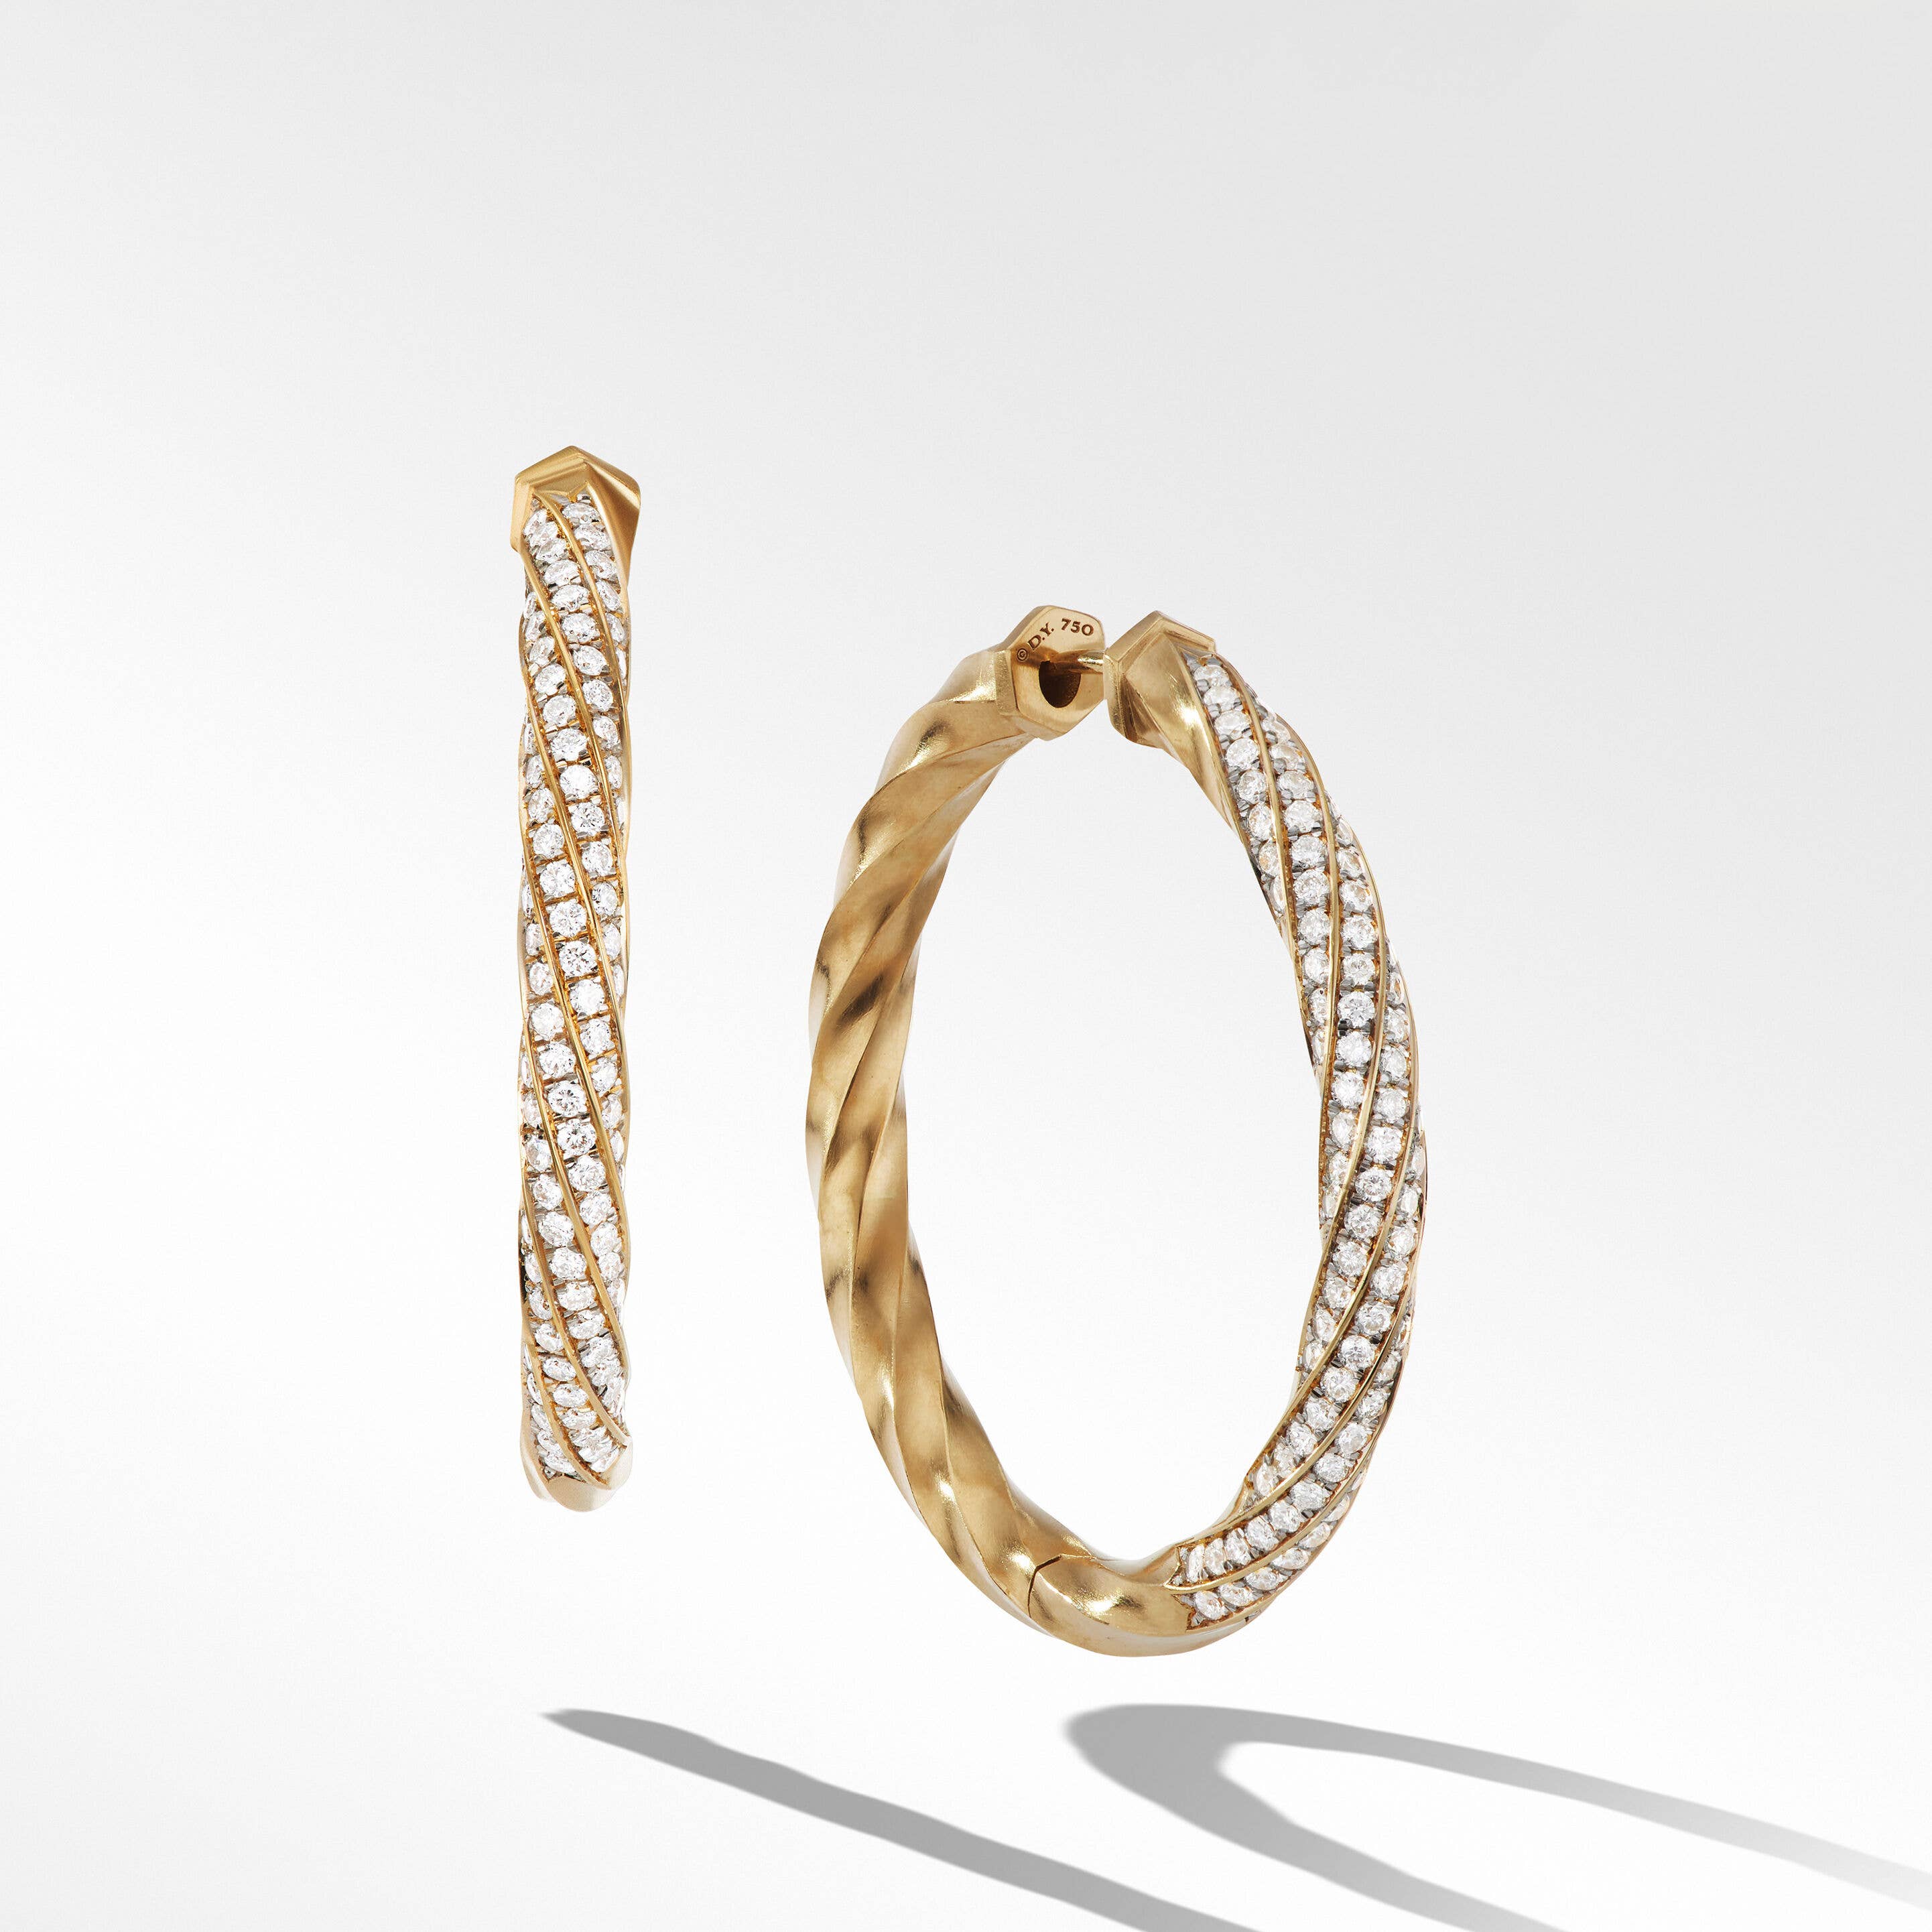 Cable Edge™ Hoop Earrings in Recycled 18K Yellow Gold with Pavé Diamonds